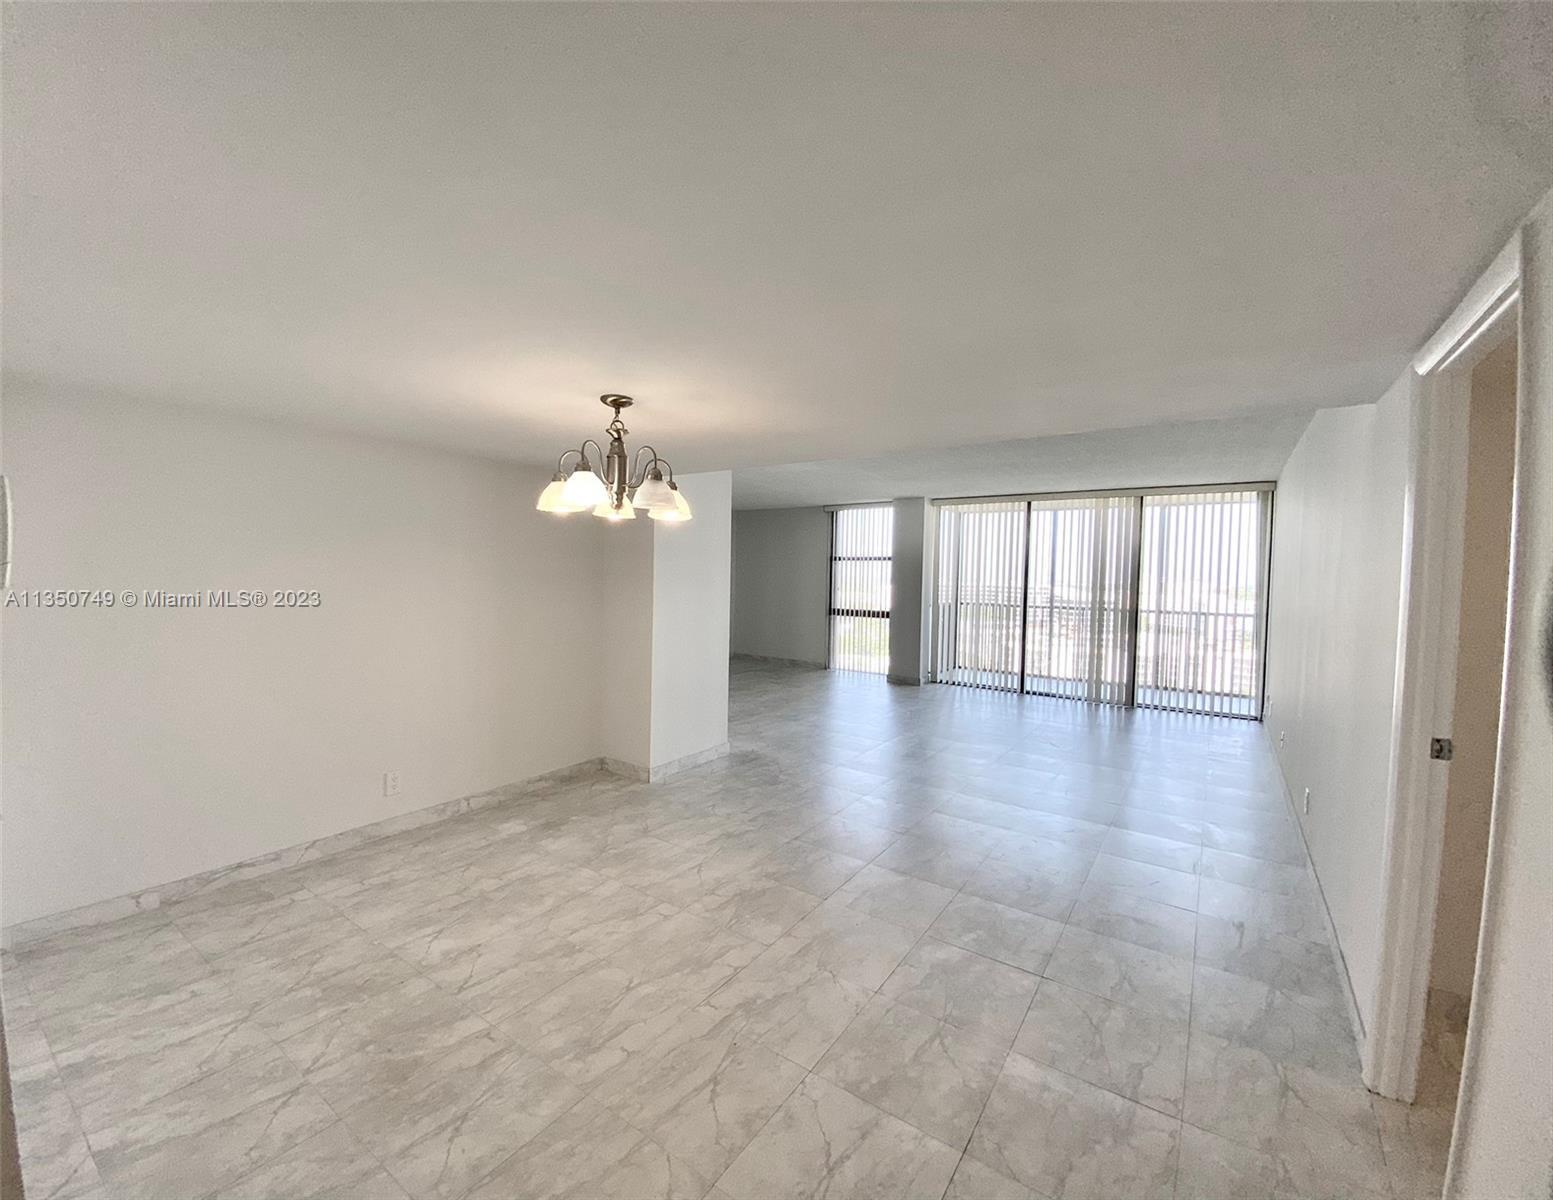 Coronado Tower 2 in Aventura is a great place to live with its prime location near the Turnberry gol